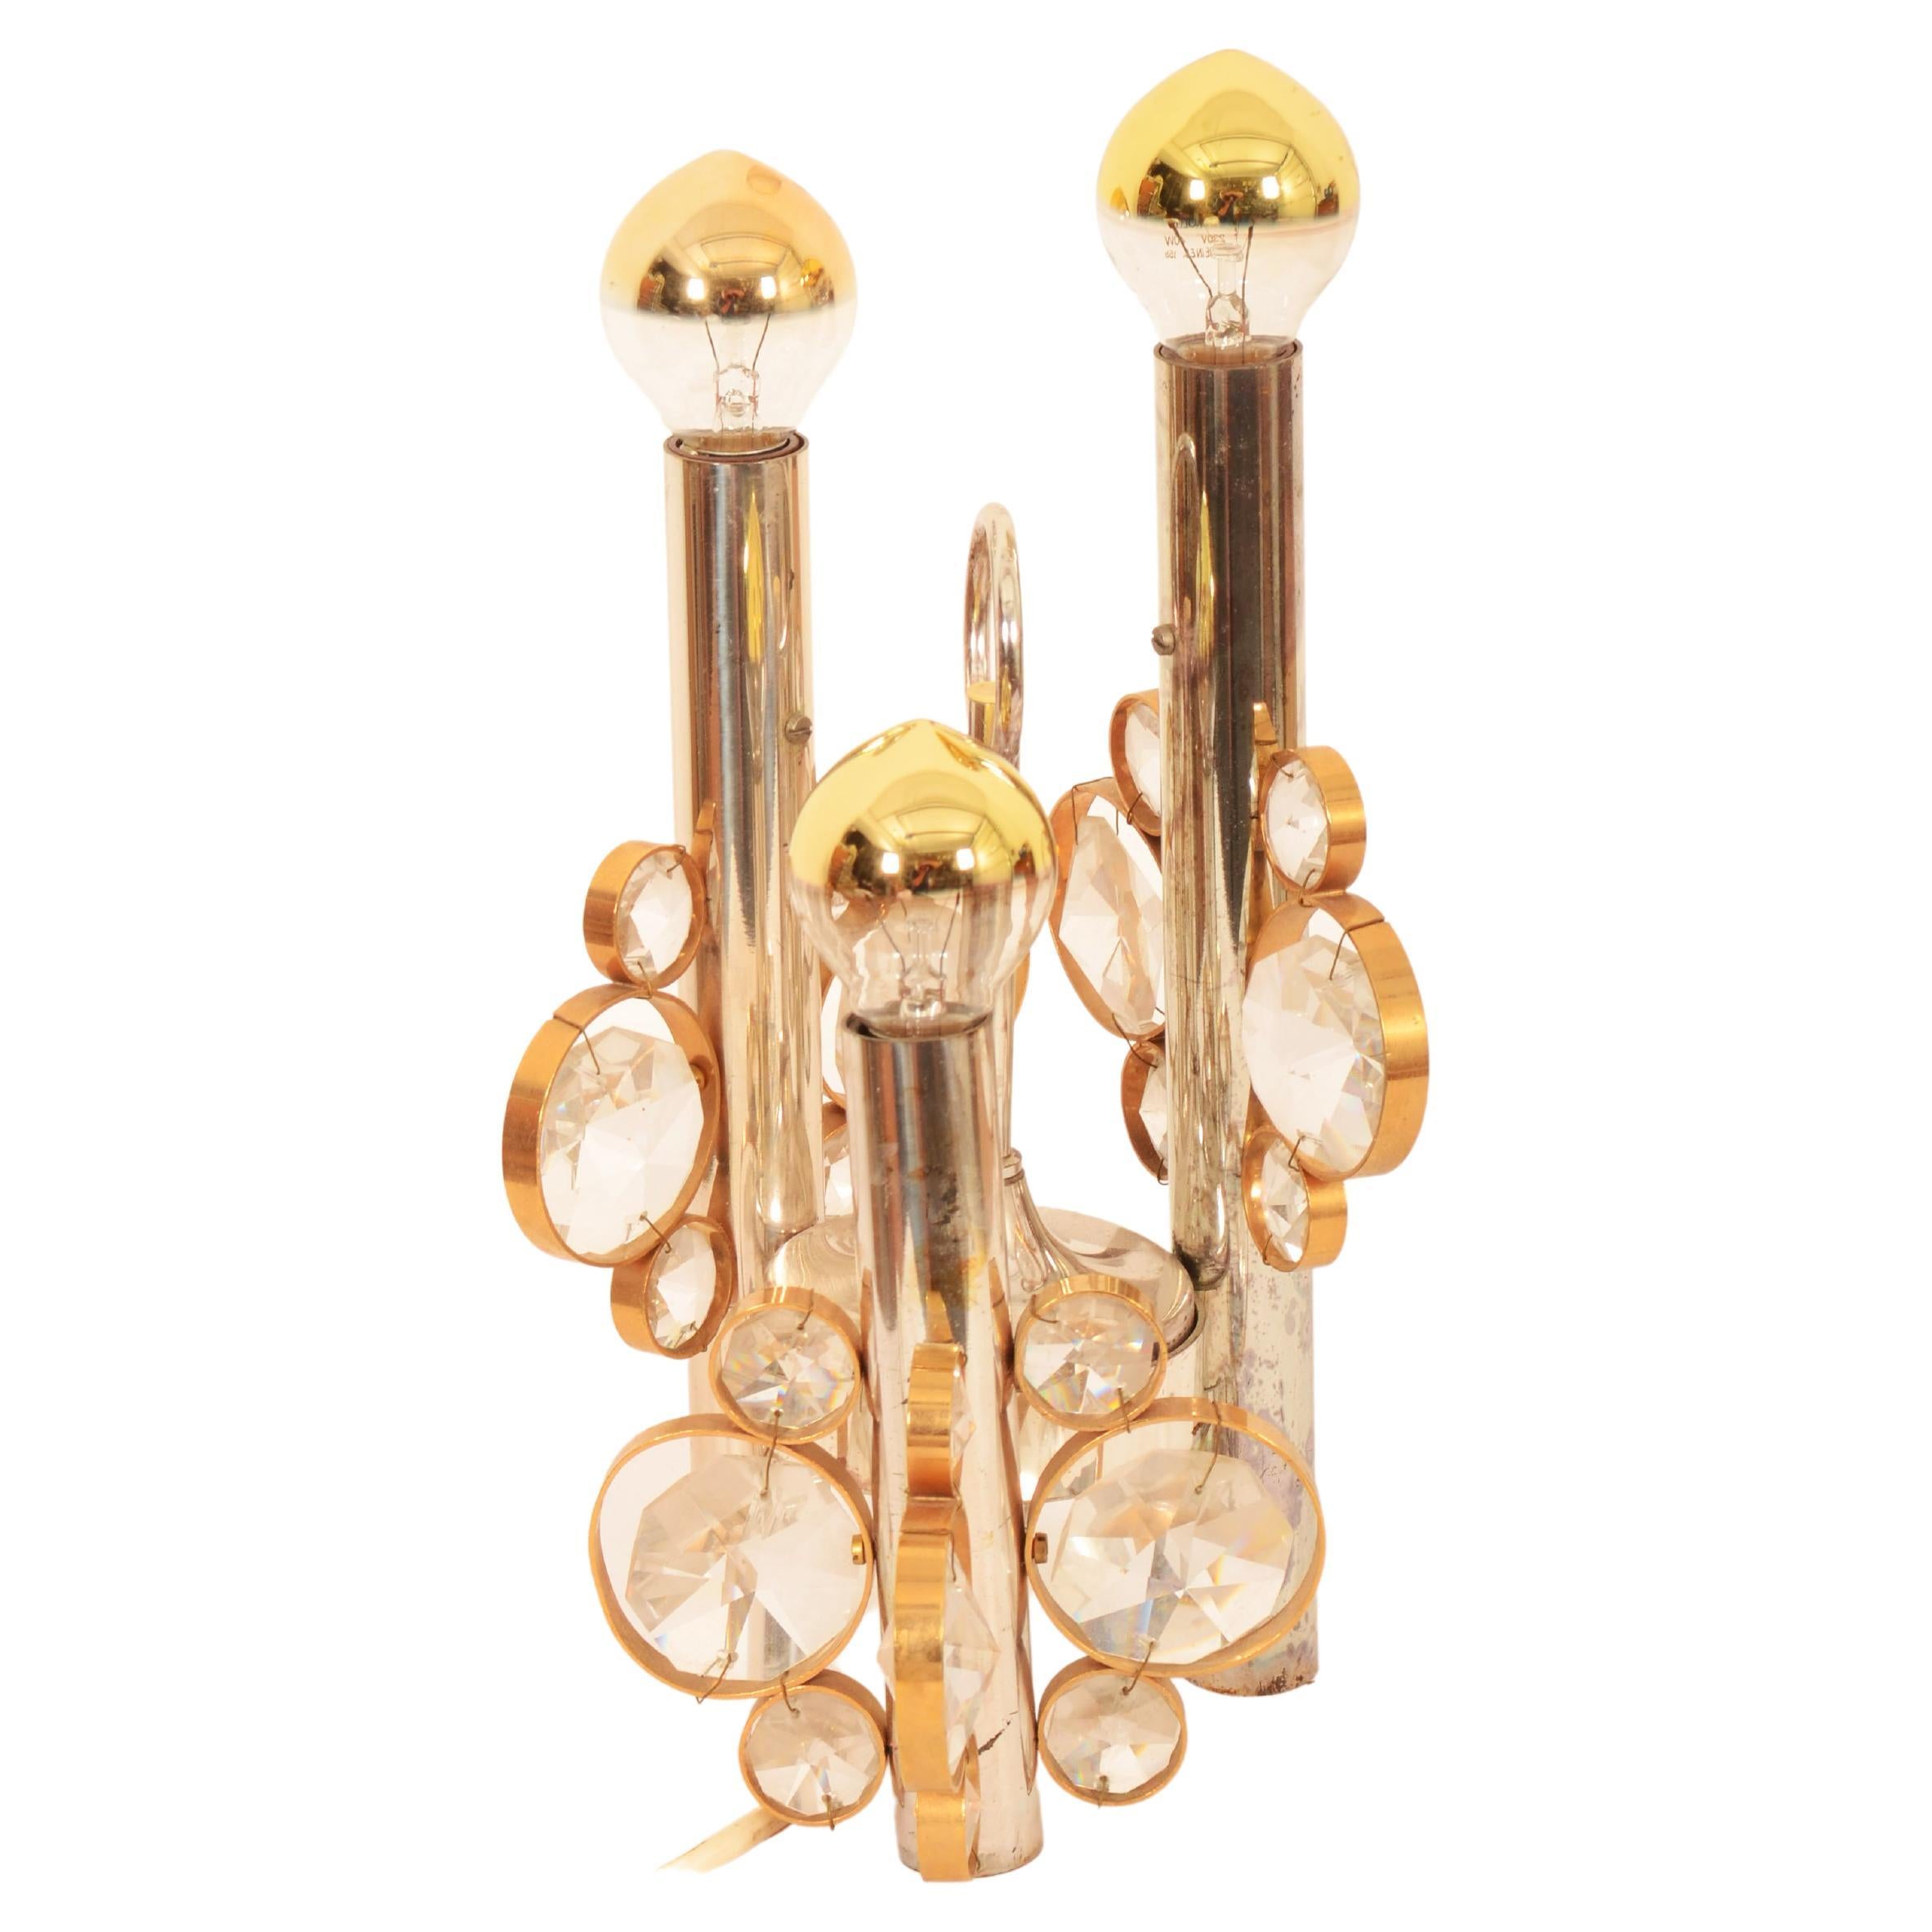 Brass base with glass elements fitted with three E14 sockets. Made in Italy in the 1970s.